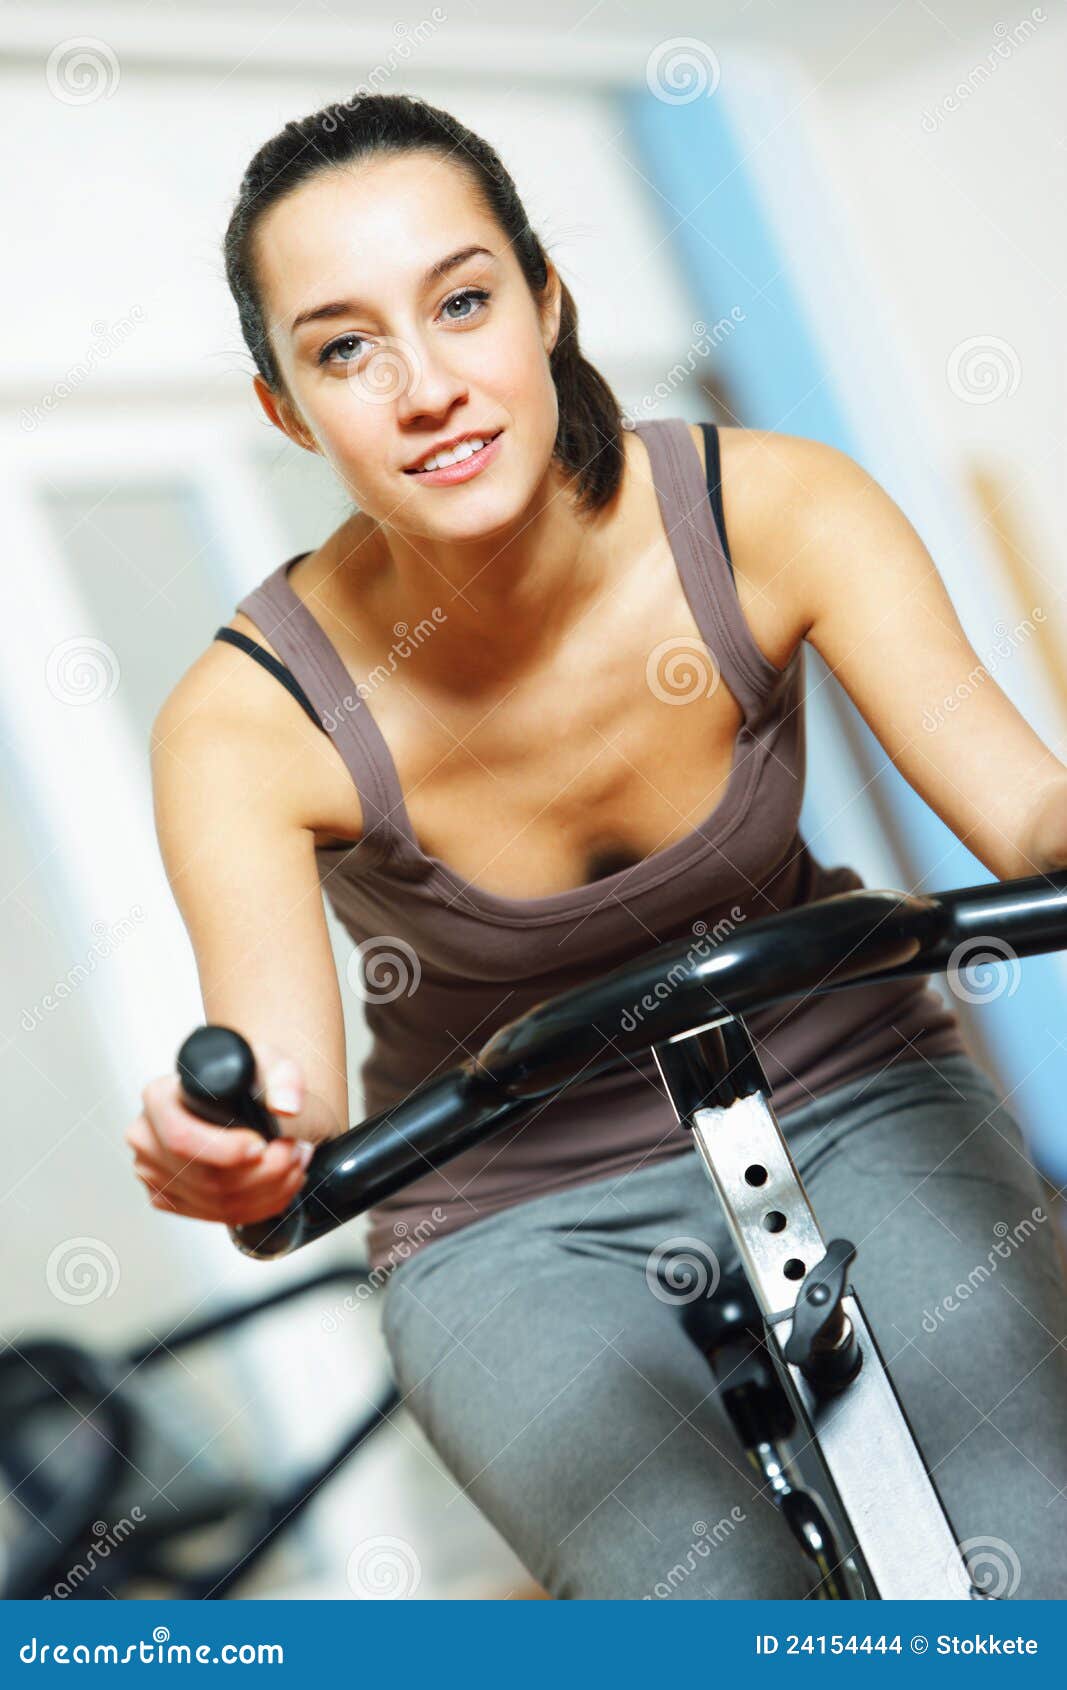 Riding an exercise bike stock photo. Image of health - 24154444